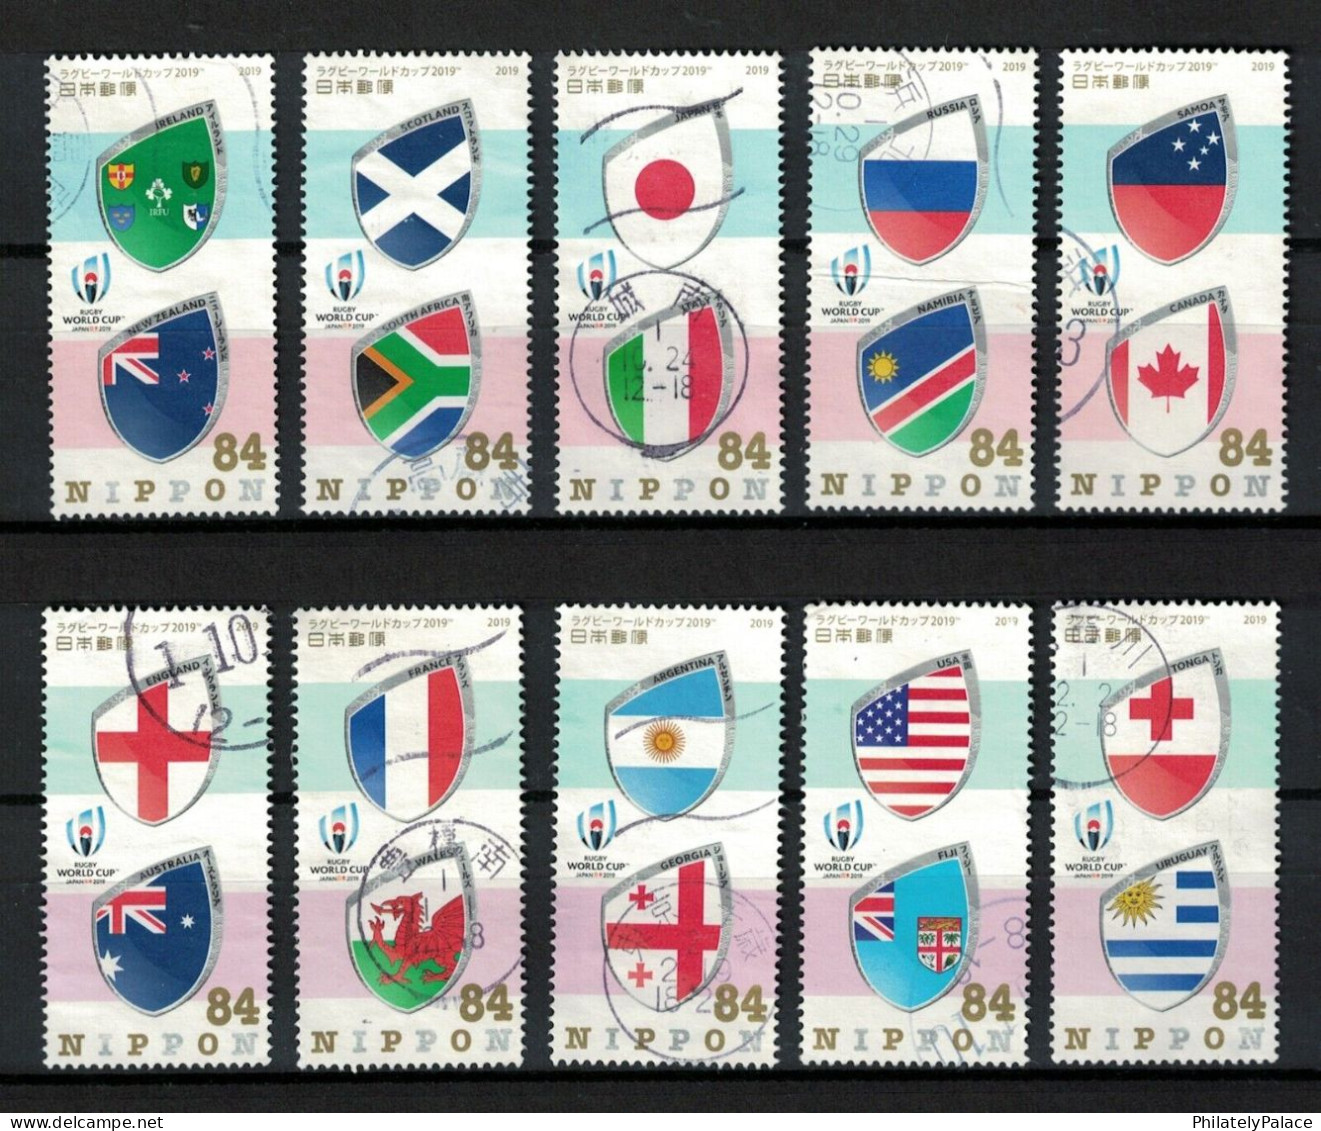 JAPAN 2019 RUGBY WORLD CUP,IRELAND,NEW ZEALAND,SOUTH AFRICA,SCOTLAND,ITALY,RUSSIA,NAMBIA,CANADA,SAMOA,10V Used SET - Used Stamps